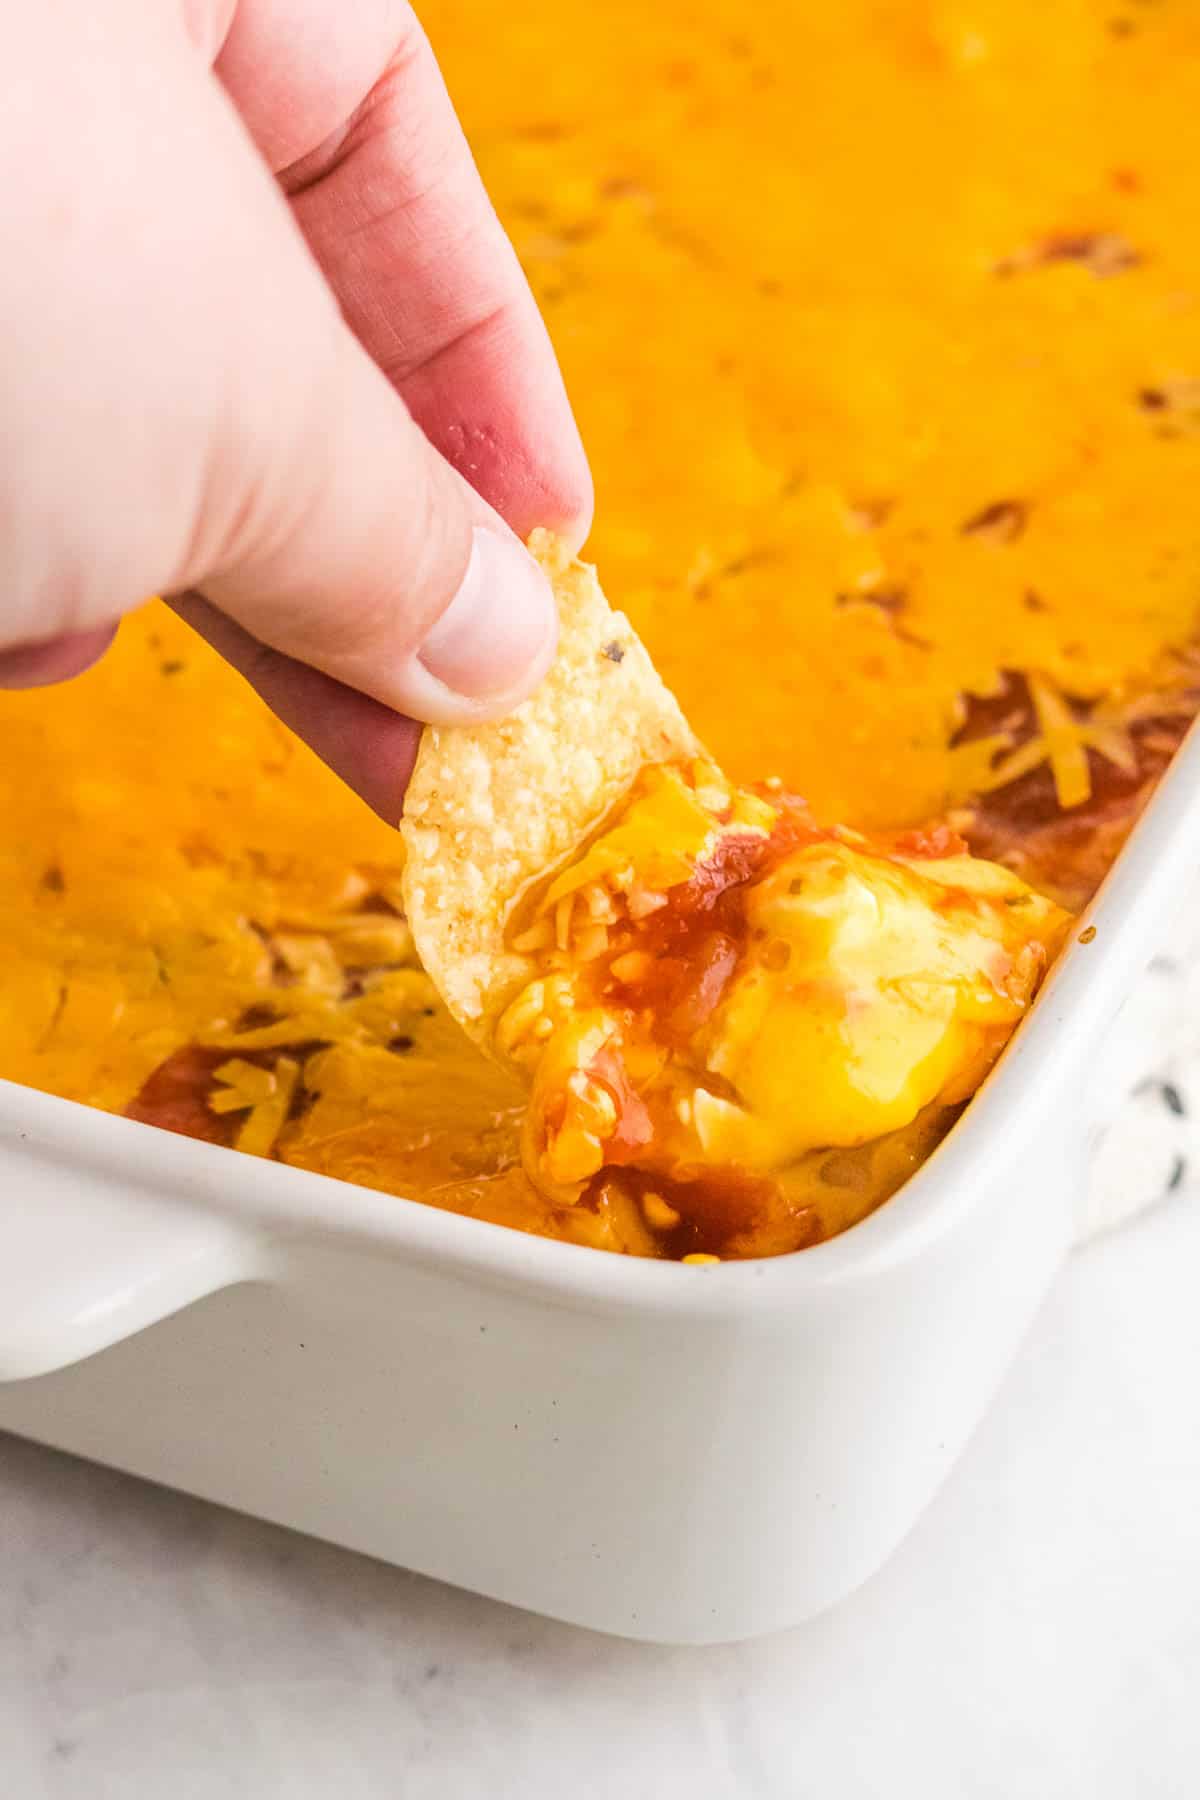 Dipping a tortilla chip into layered Mexican dip